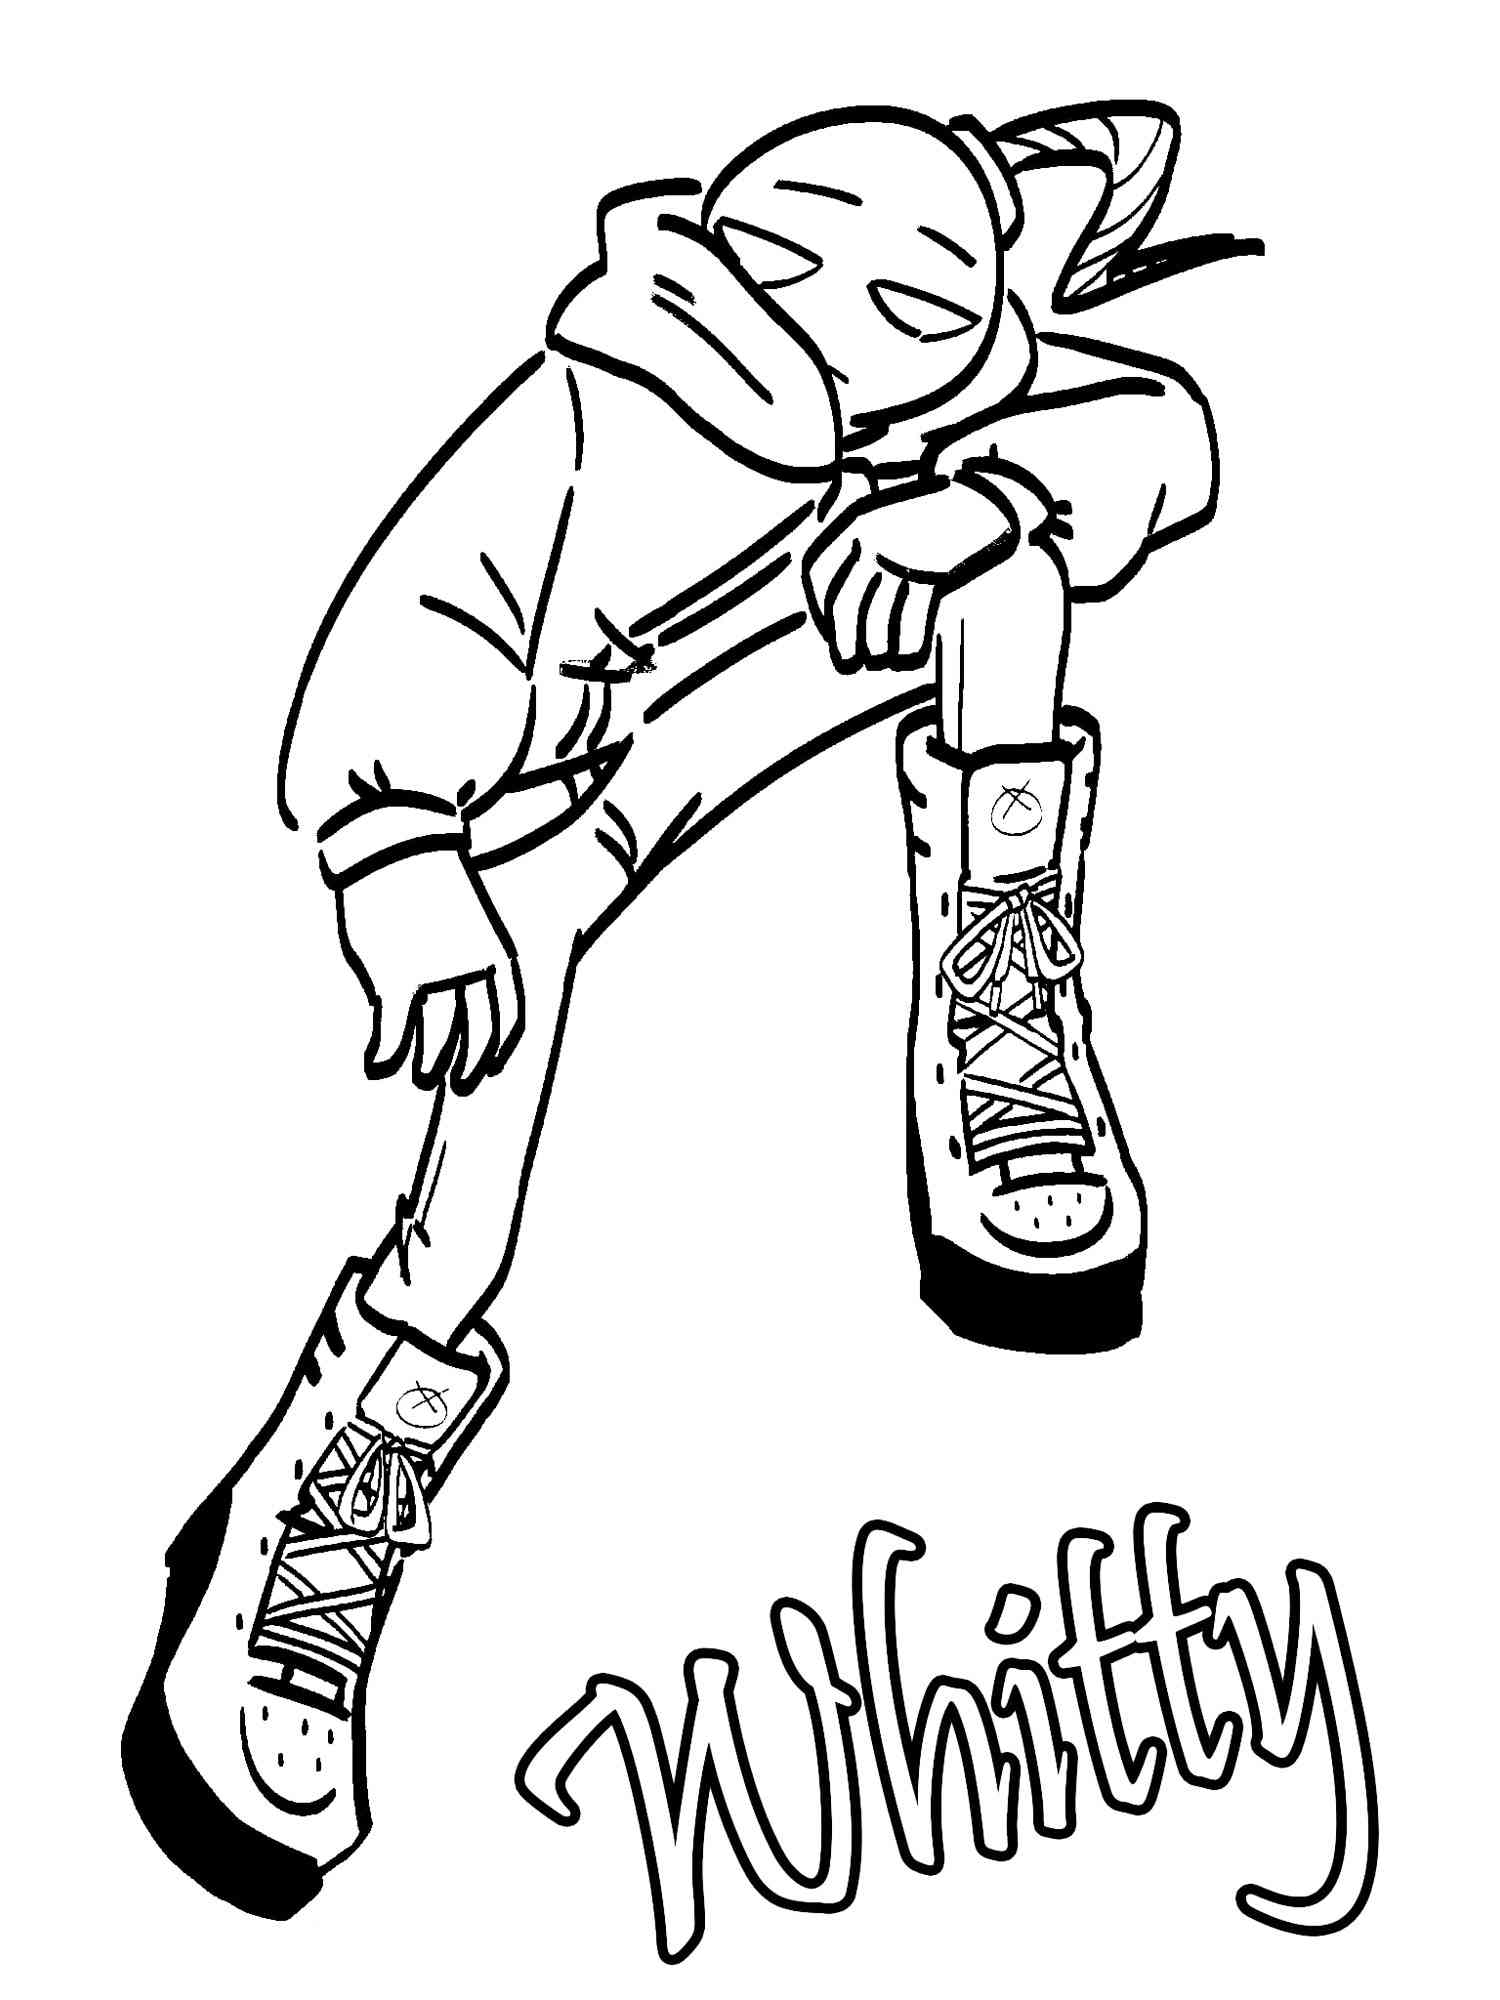 Whitty Friday Night Funkin coloring page